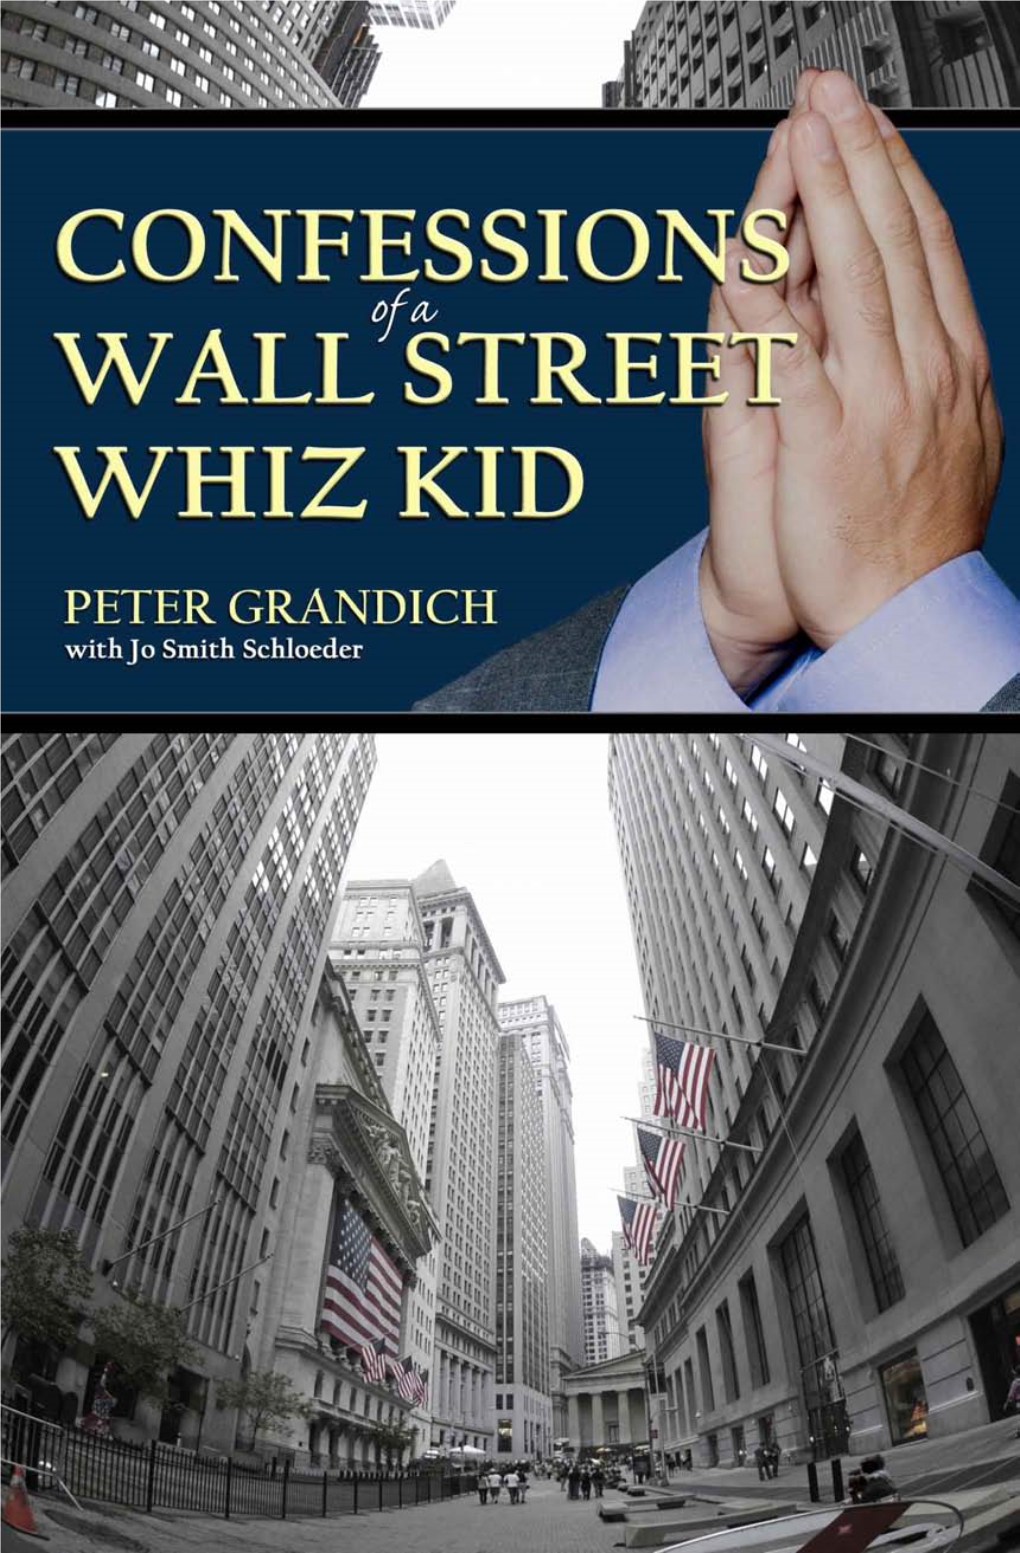 Confessions of a Wall Street Whiz Kid